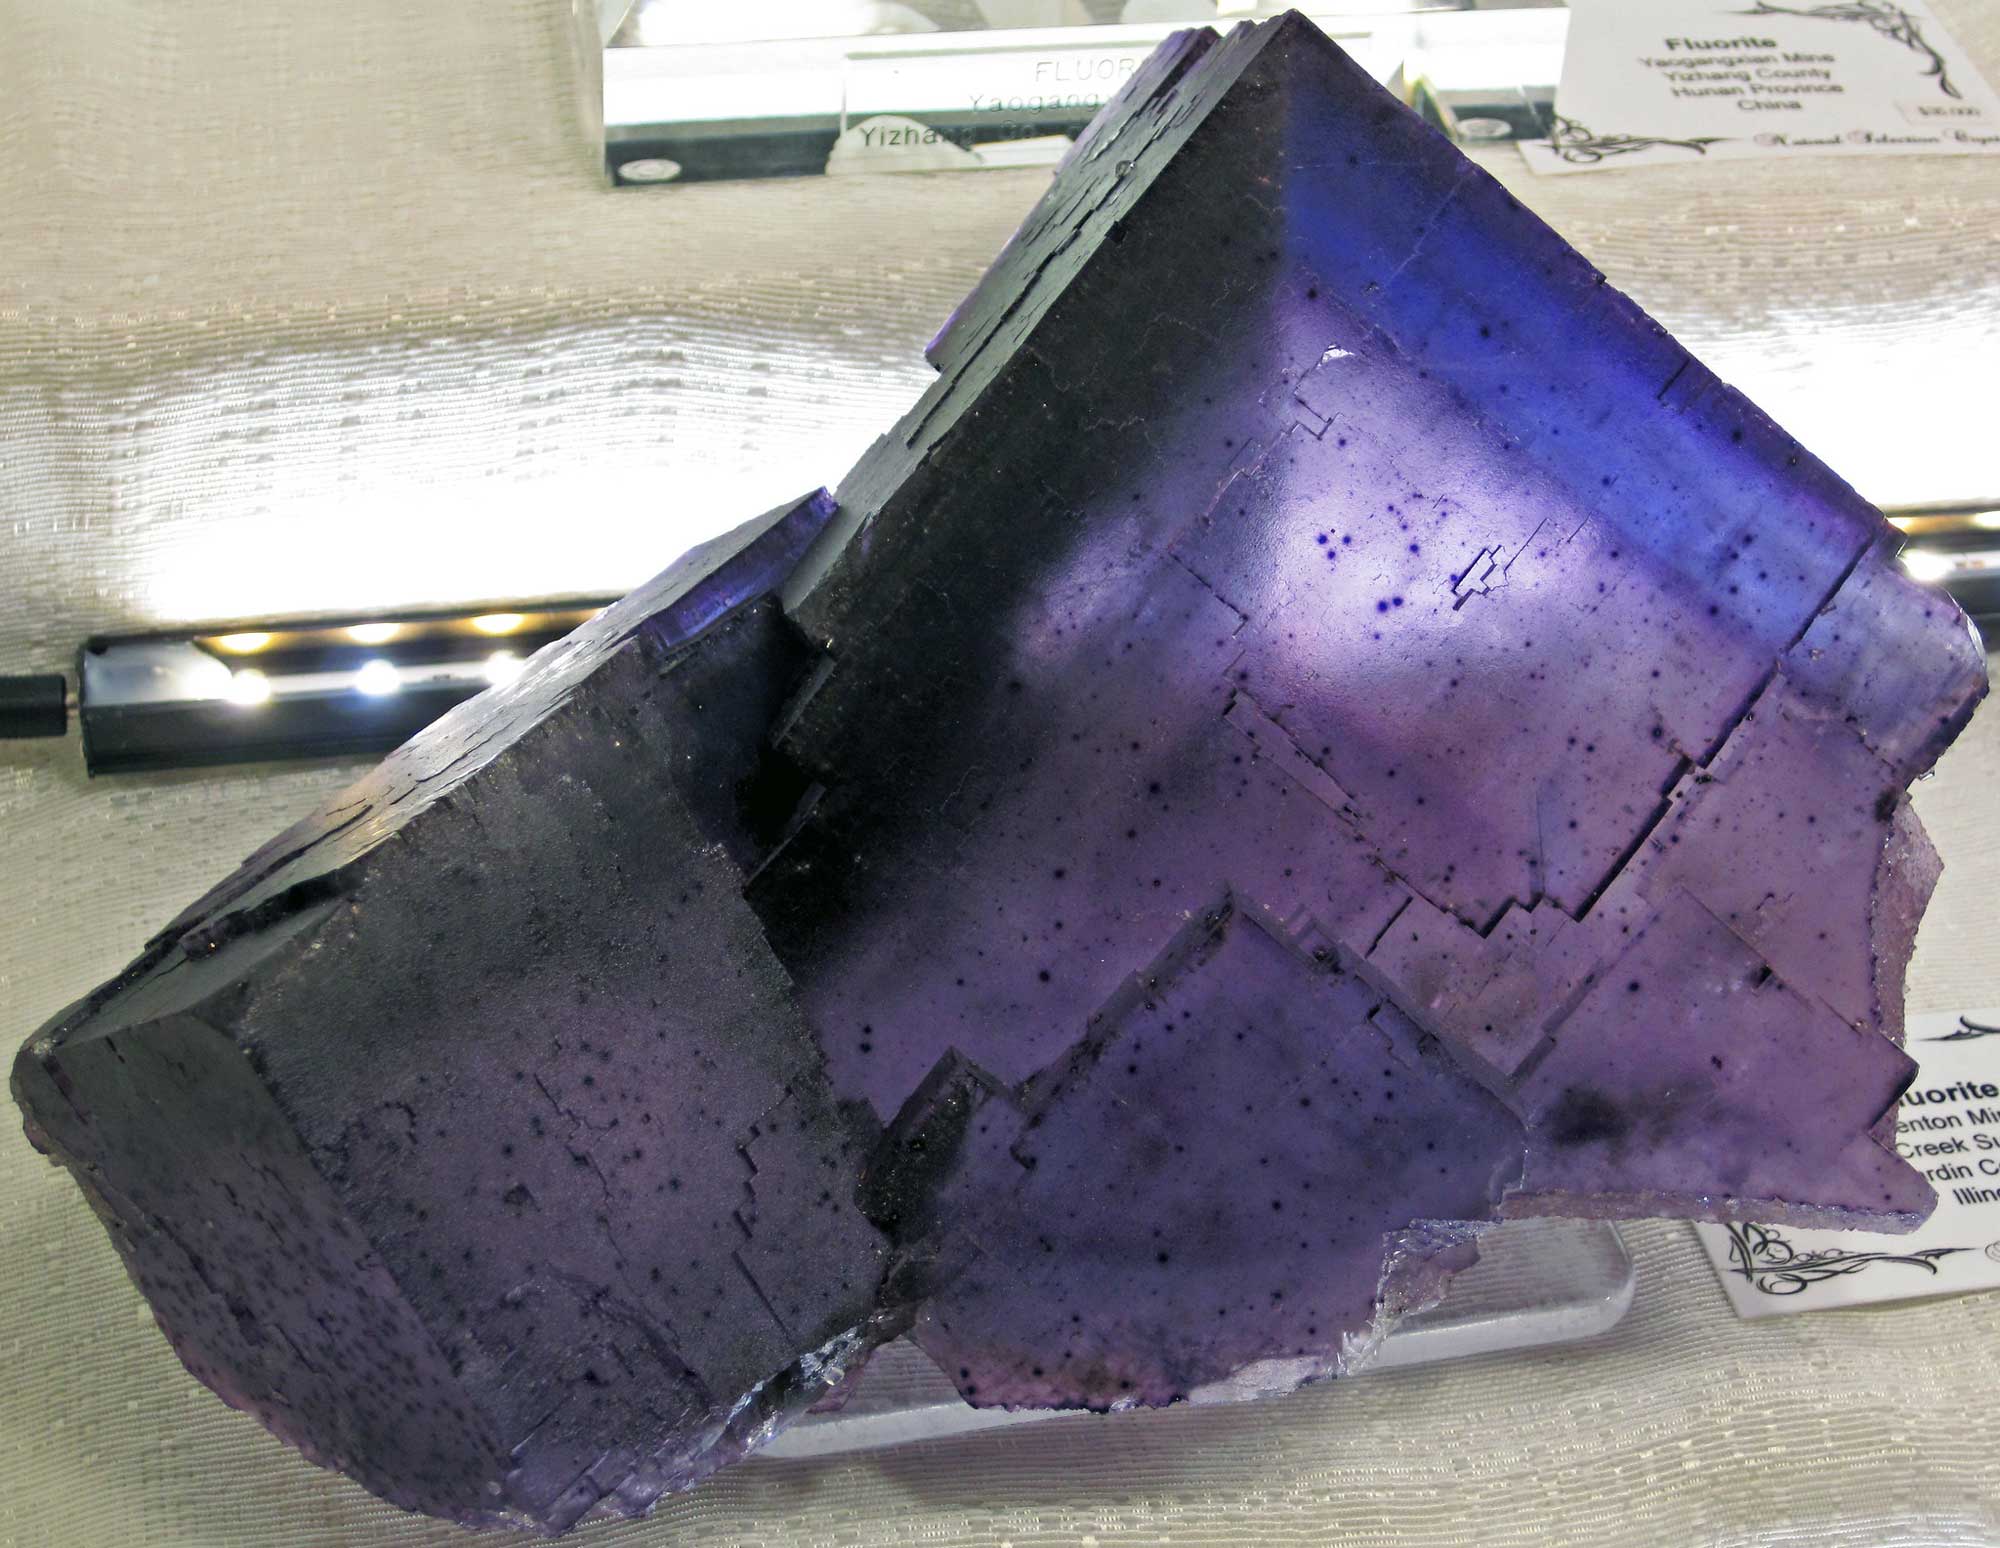 Photograph of a sample of the mineral fluorite from Illinois.